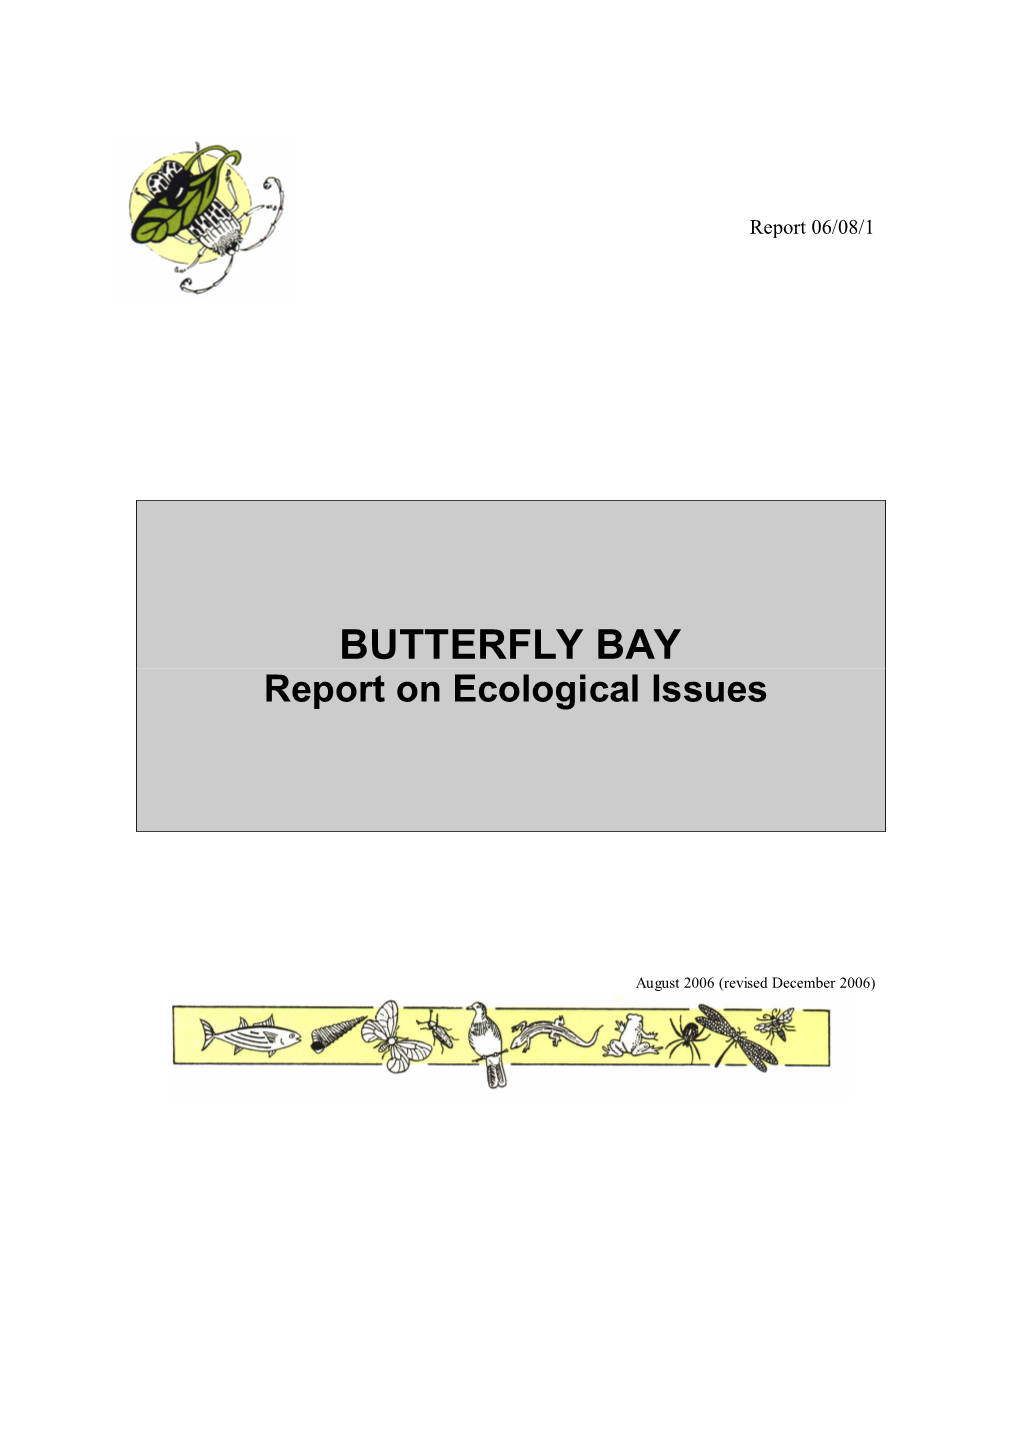 BUTTERFLY BAY Report on Ecological Issues